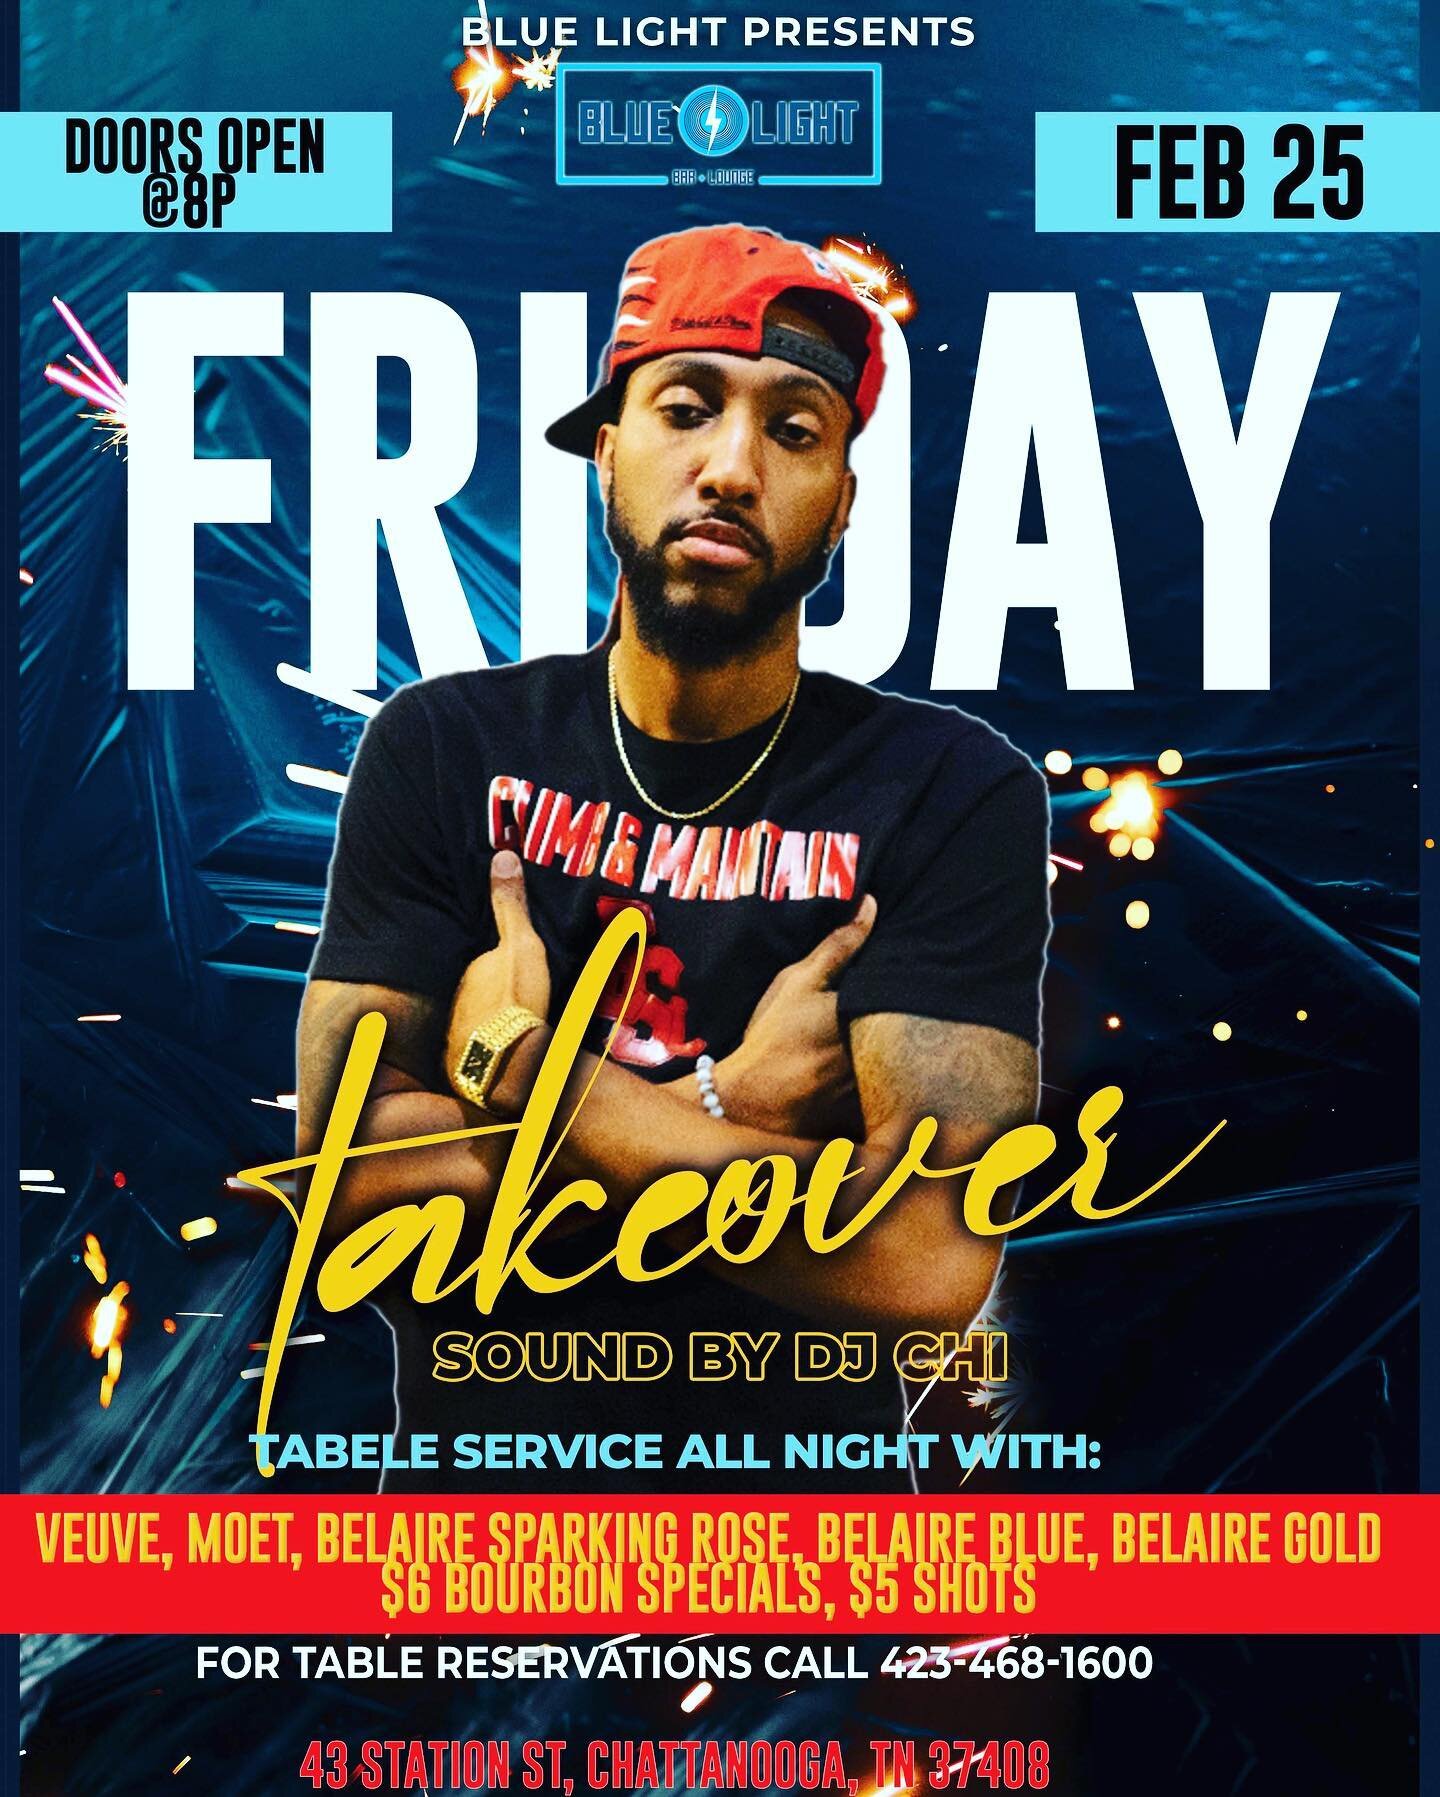 Come take over @bluelightchattanooga with me tomorrow and take advantage of ALL the drink specials! #FridayTakeOver #BlueLightChattanooga #TurnUpTheChiWay